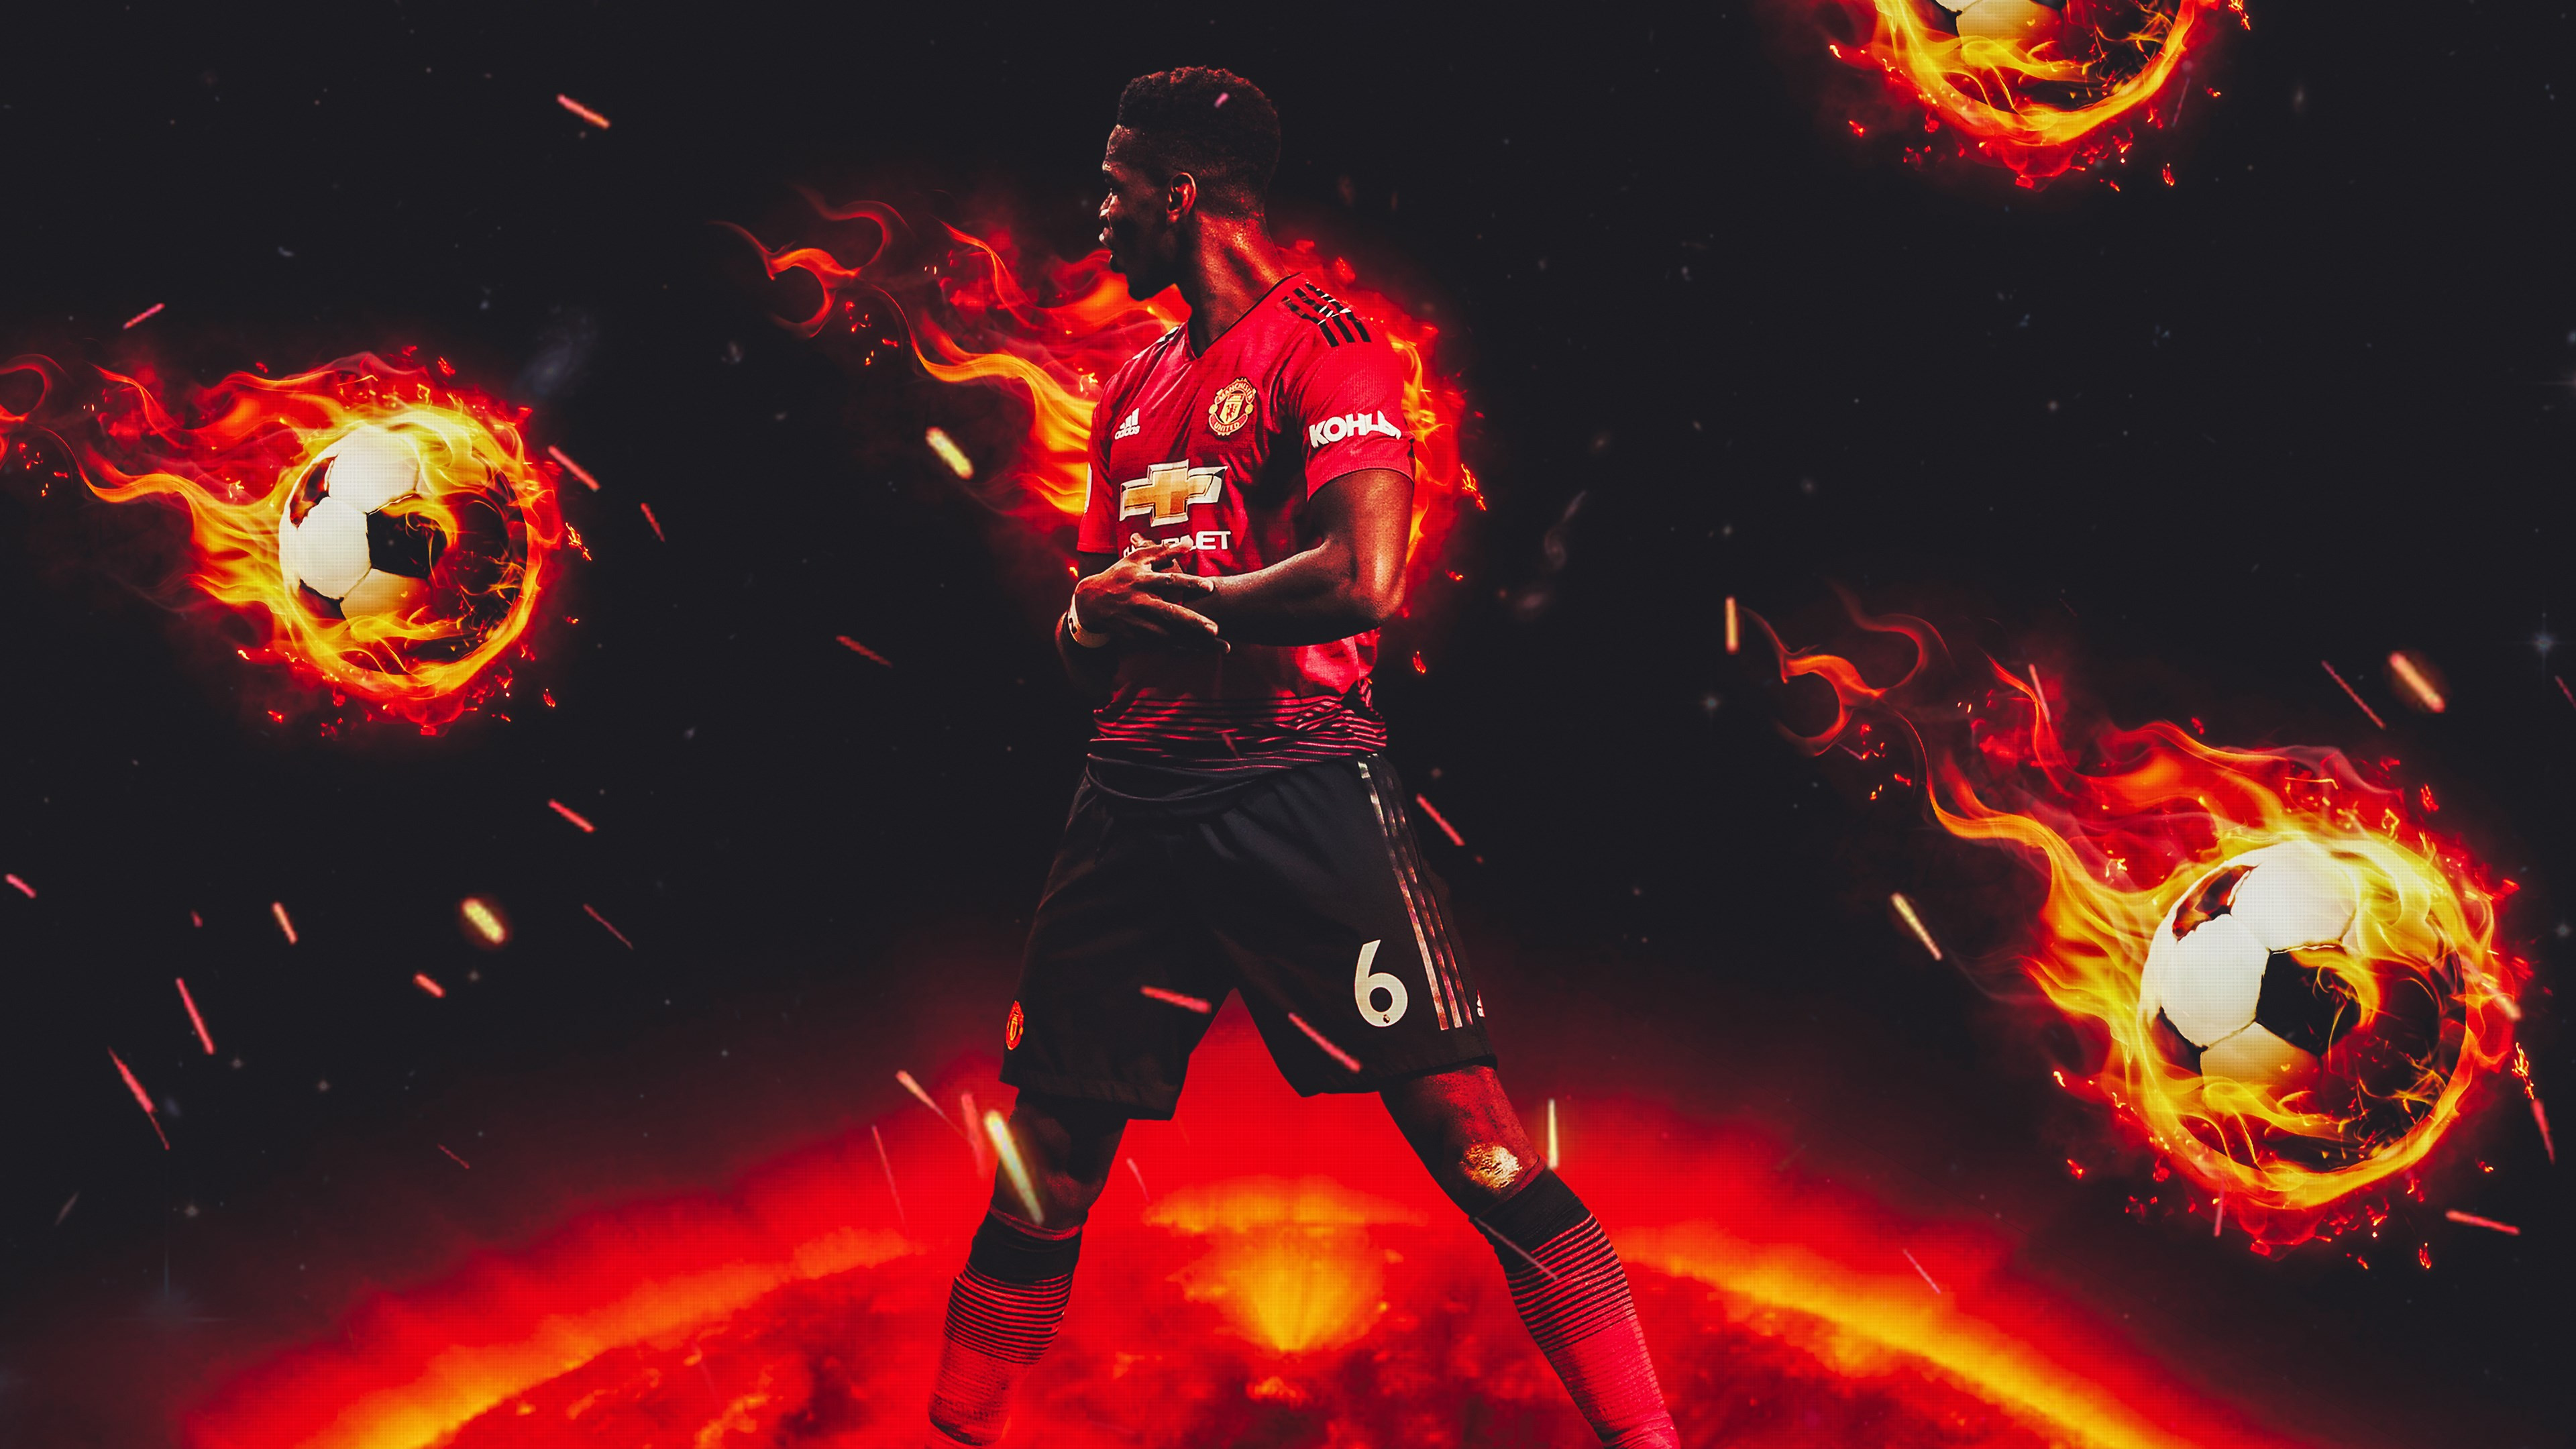 Paul Pogba for Manchester United wallpaper 3840x2160